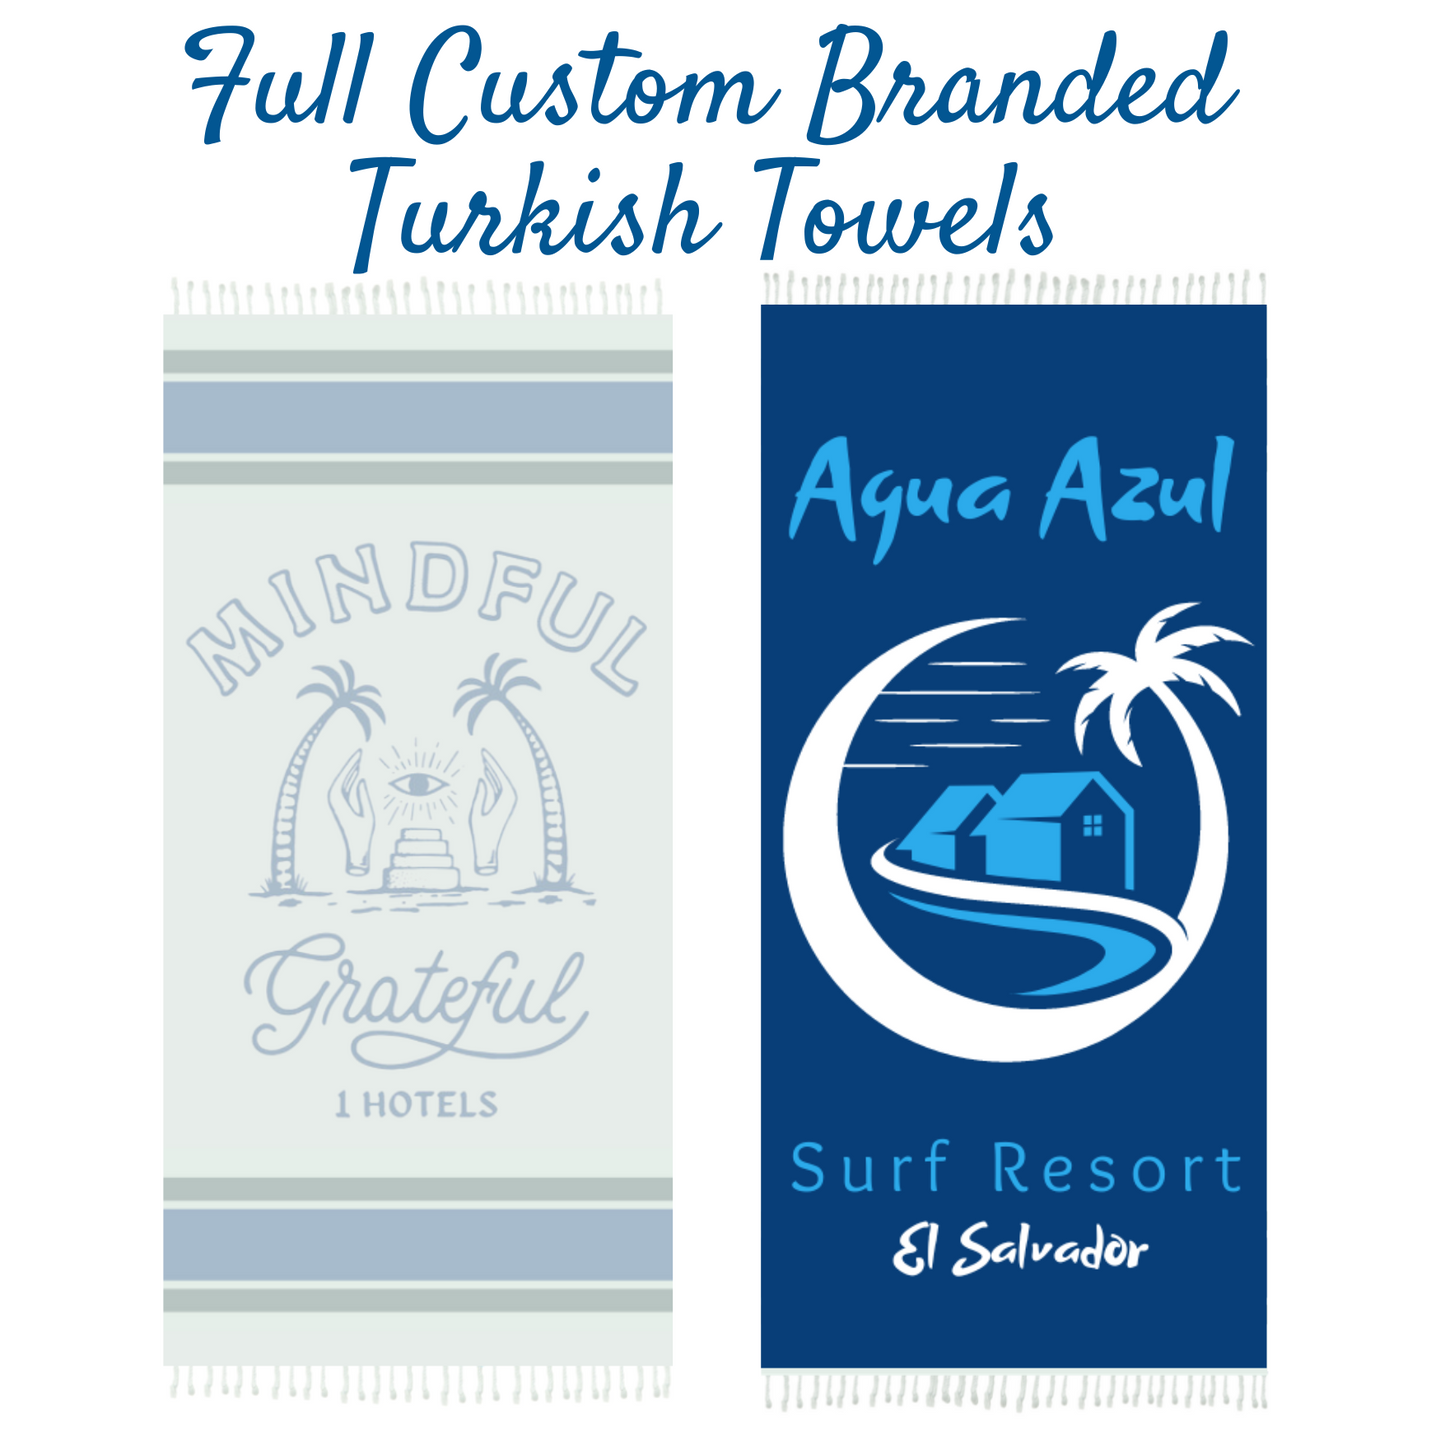 FULL Custom Branded Turkish Towels - WHOLESALE ONLY! MOQ 240 towels